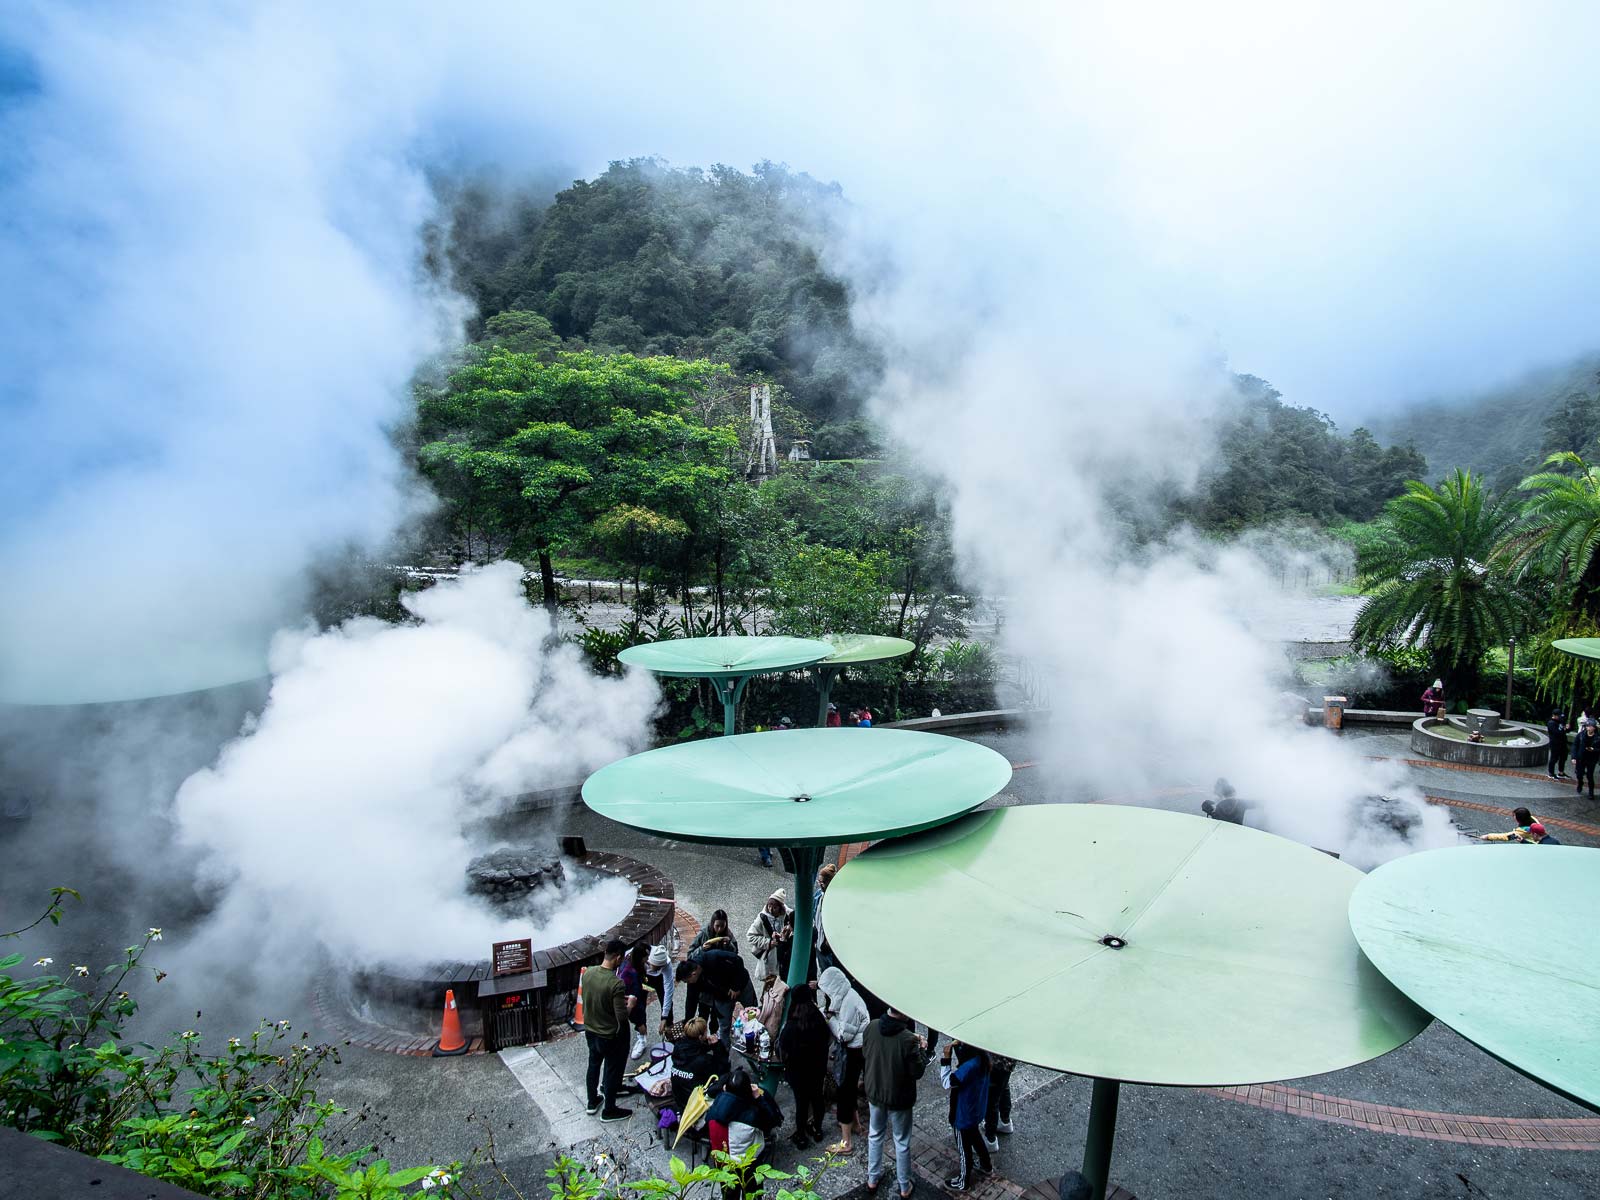 Steam rises from egg-boiling pools, obscuring the forest and valley in the background.